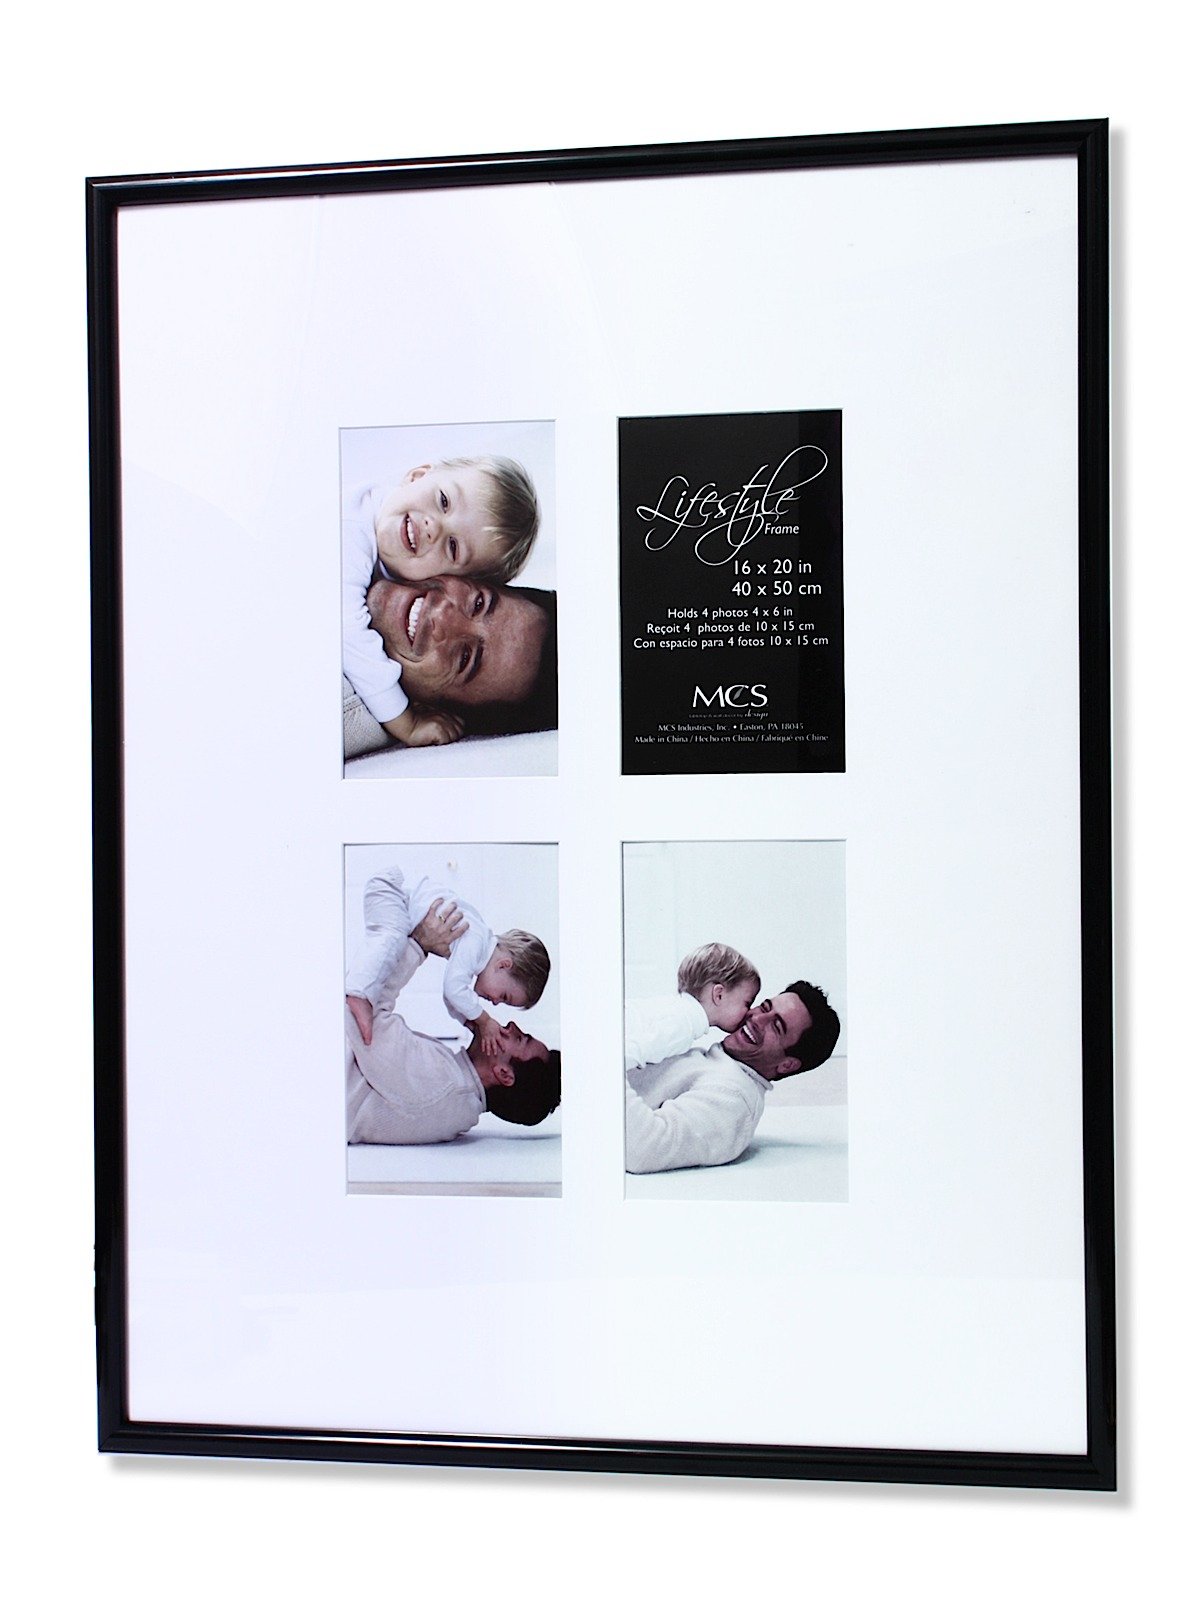 MCS Lifestyle Collage Frame 16 in. x 20 in. 4 - 4 in.x 6 in. openings Black